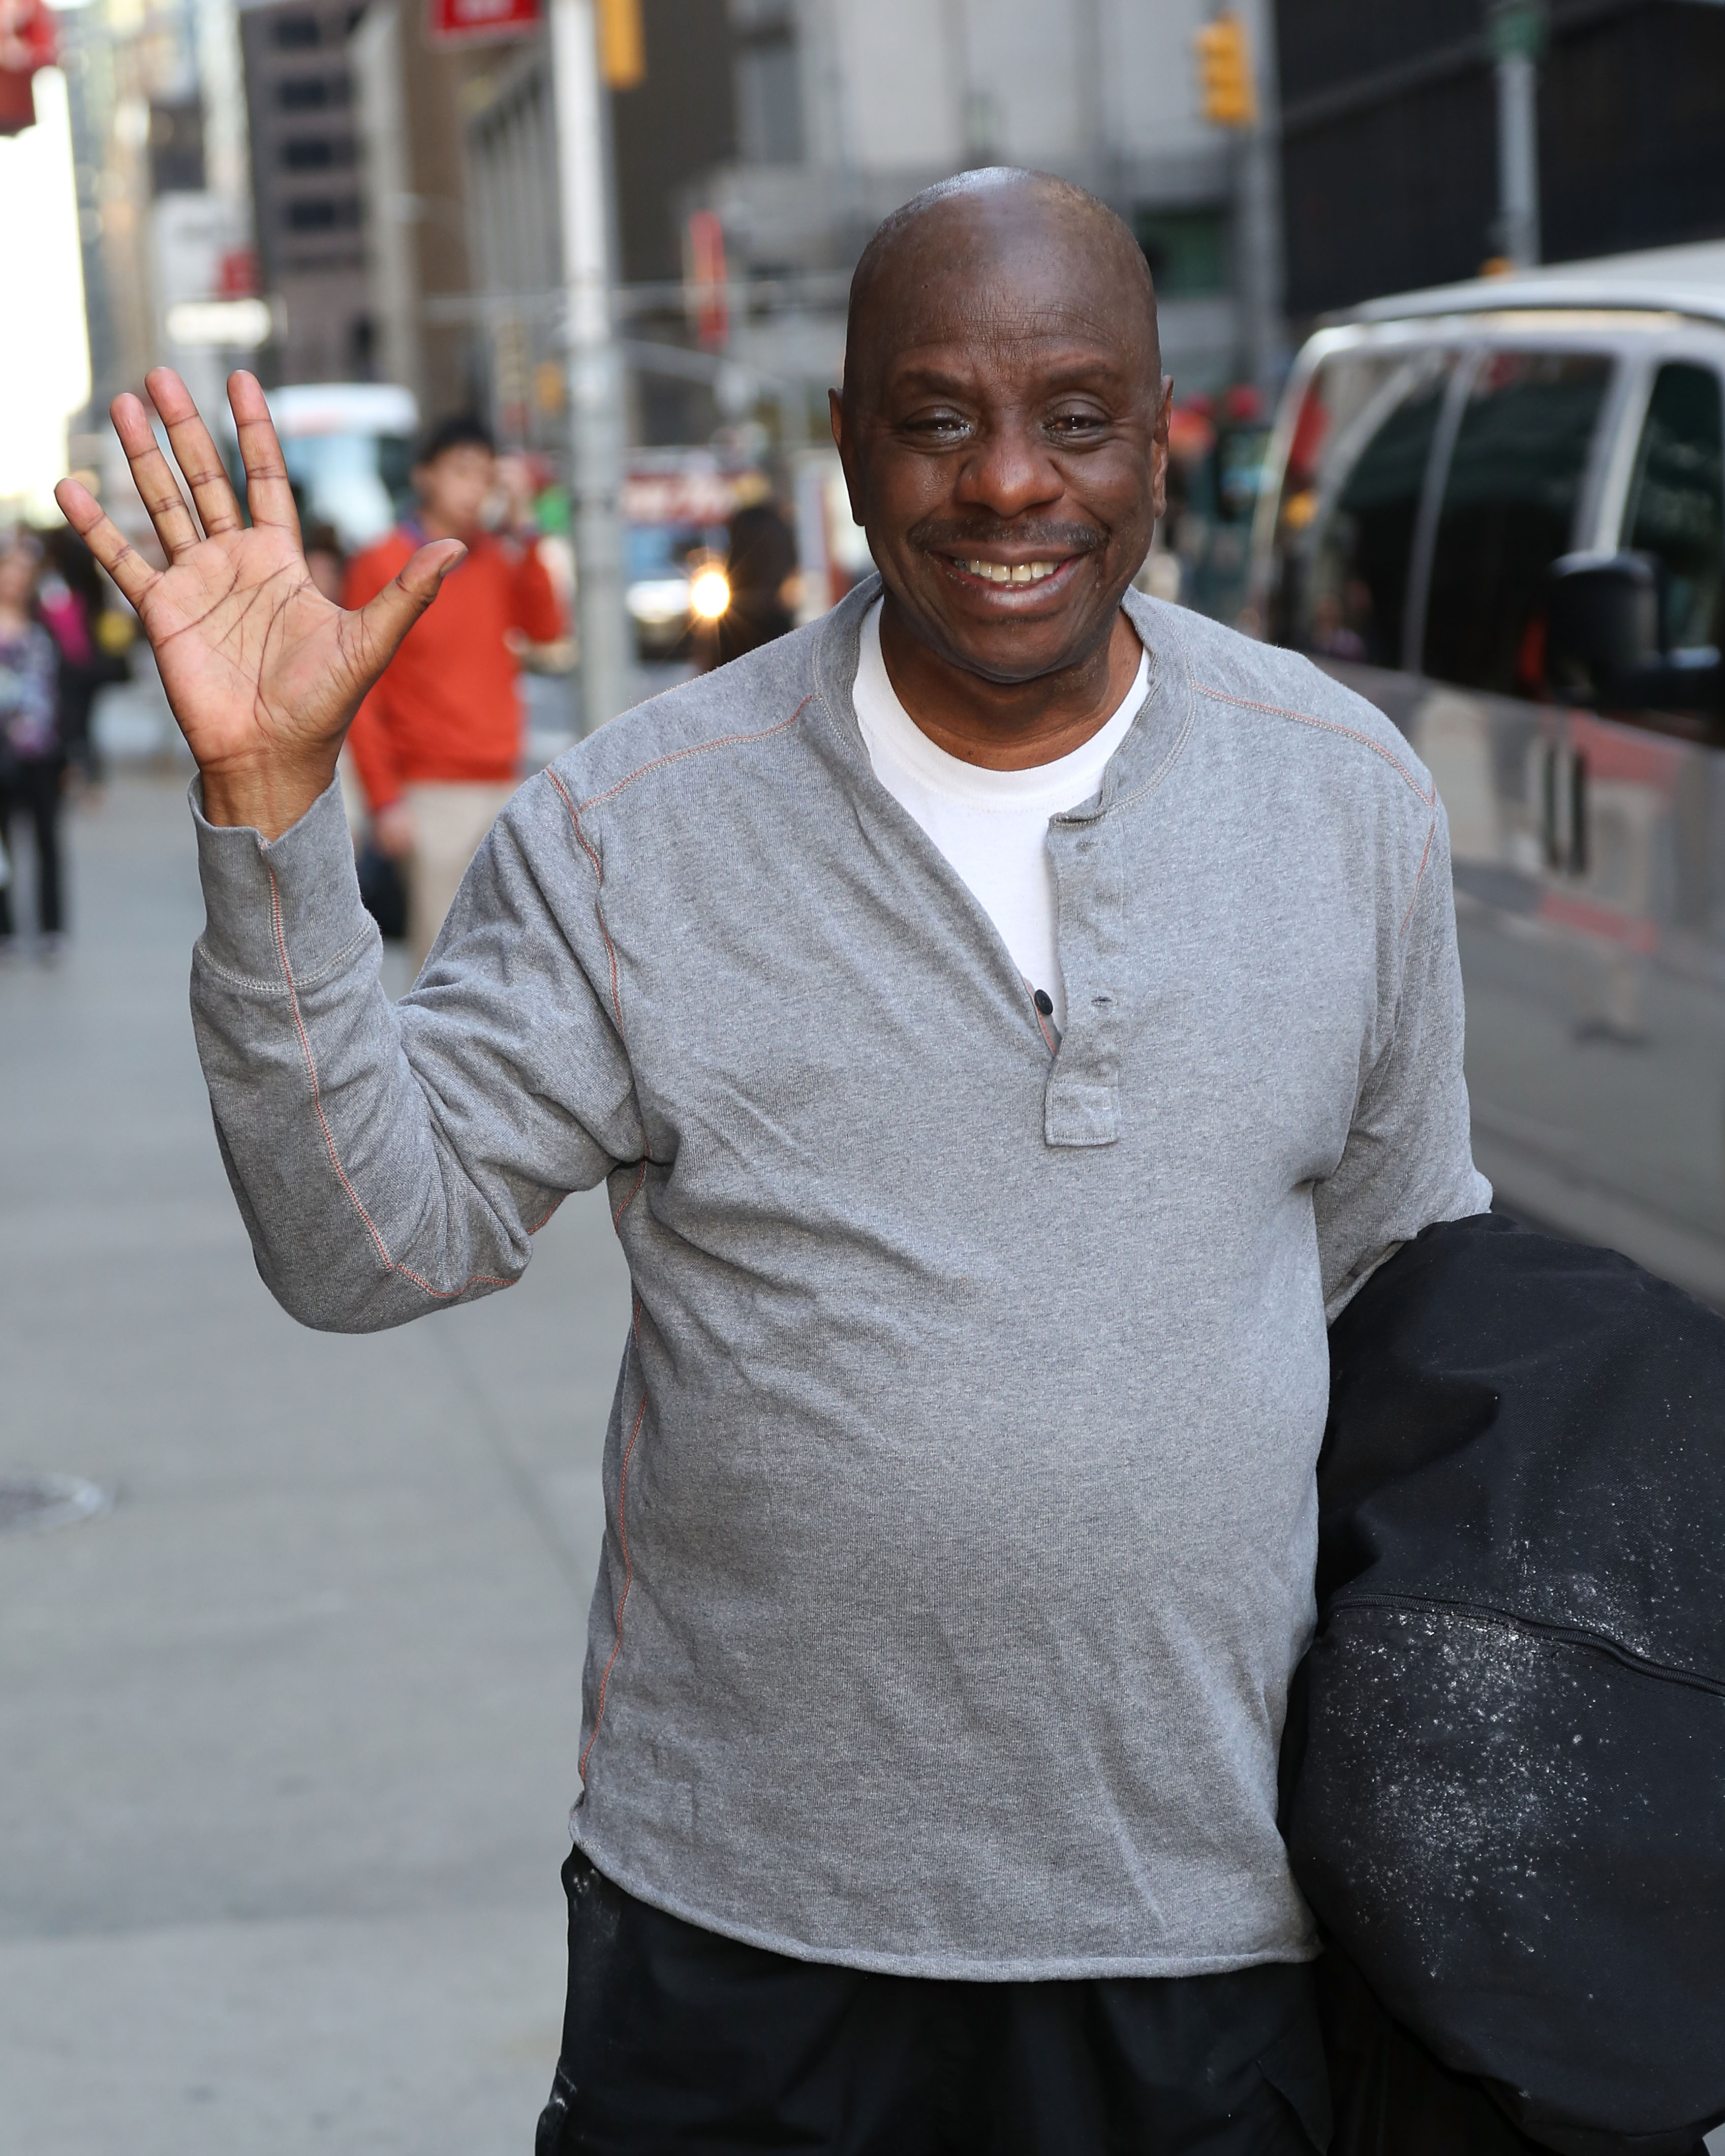 Jimmie Walker Now See What the Actor Has Been up to Since Good Times!